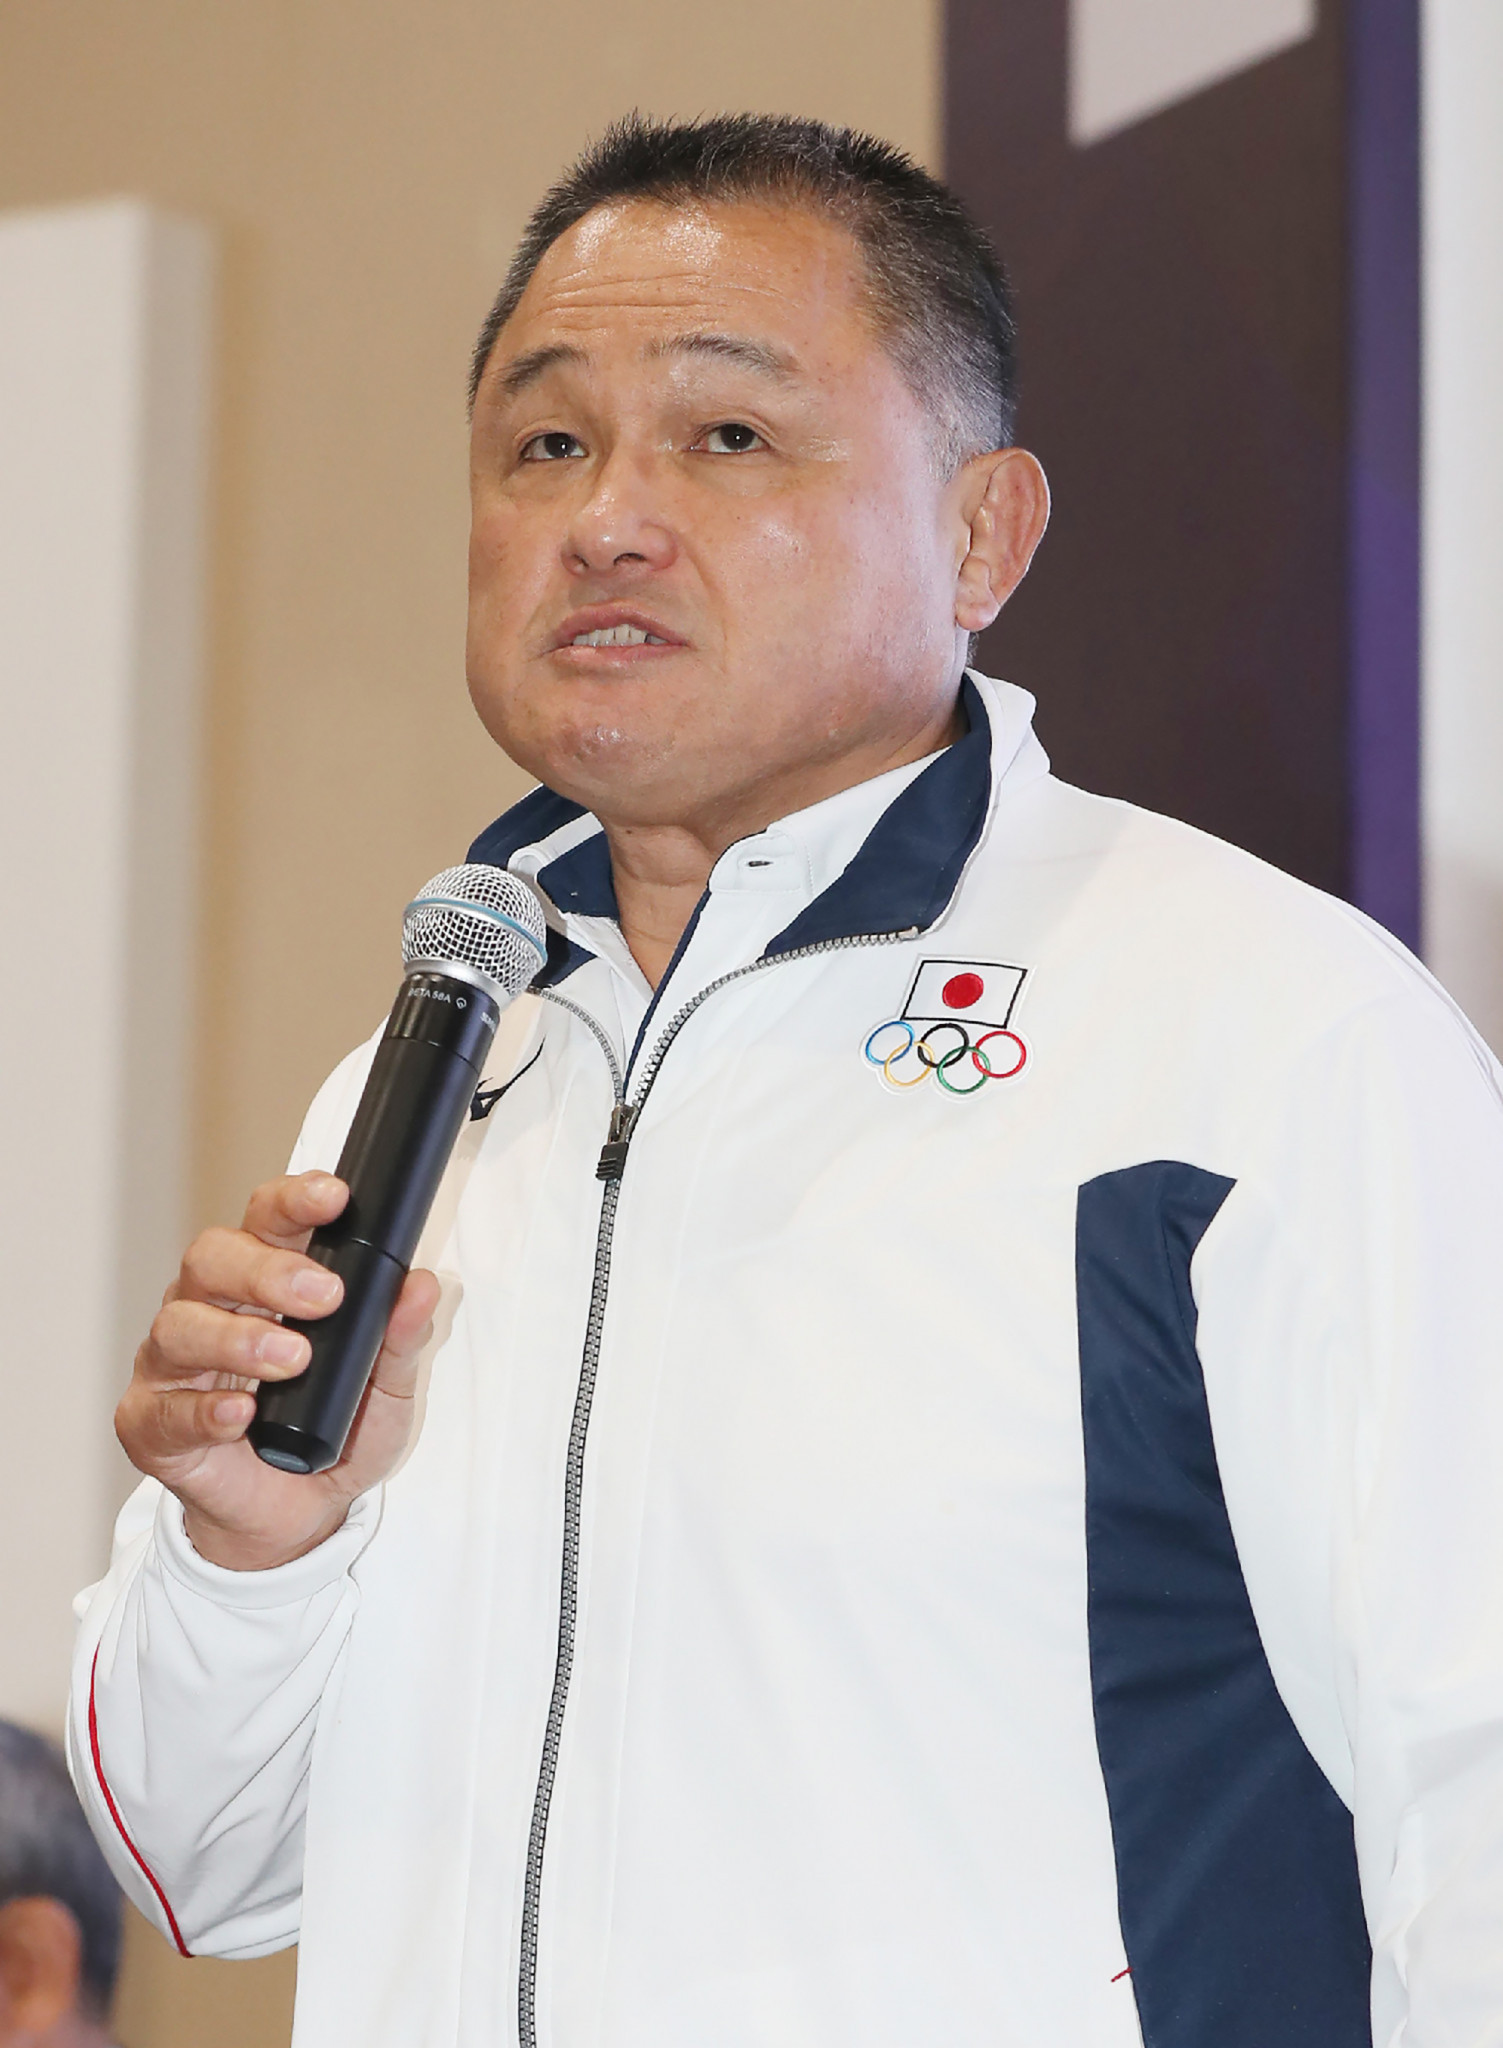 Olympic judo gold medallist and All Japan Judo Federation President Yasuhiro Yamashita is expected to be among the names considered to join the IOC as a replacement for Tsunekazu Takeda ©Getty Images